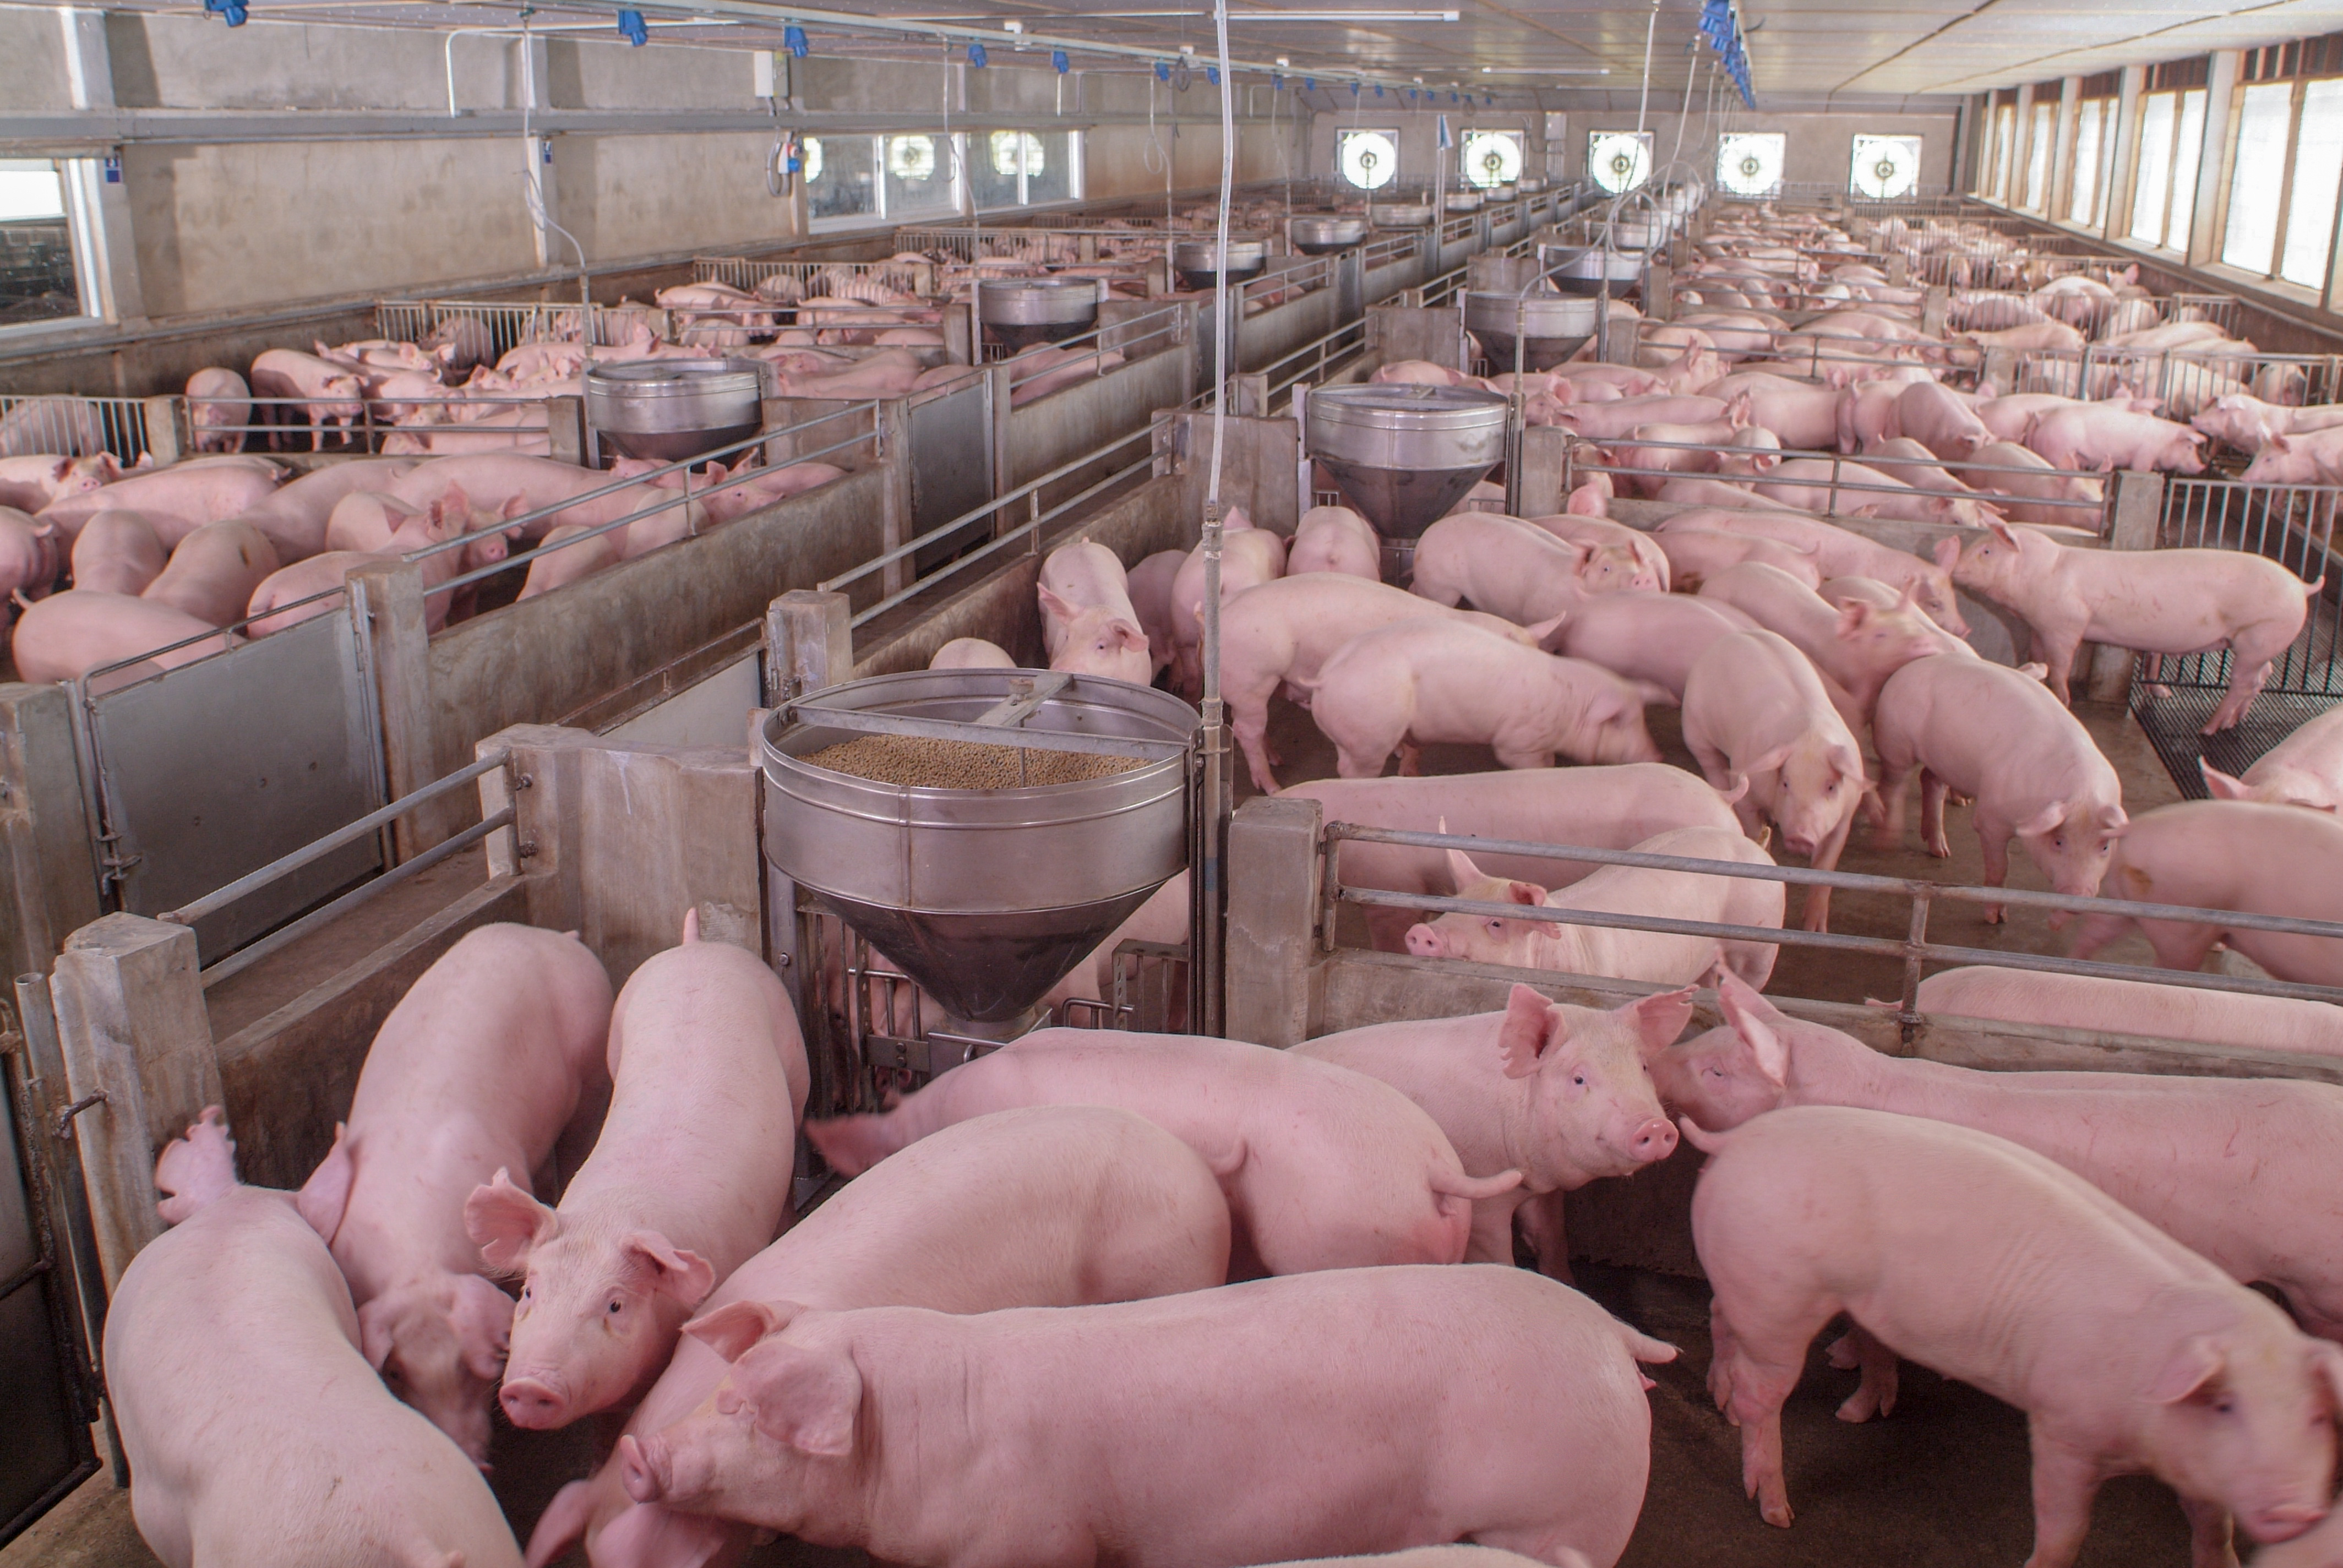 Hundreds of pigs in an indoor barn